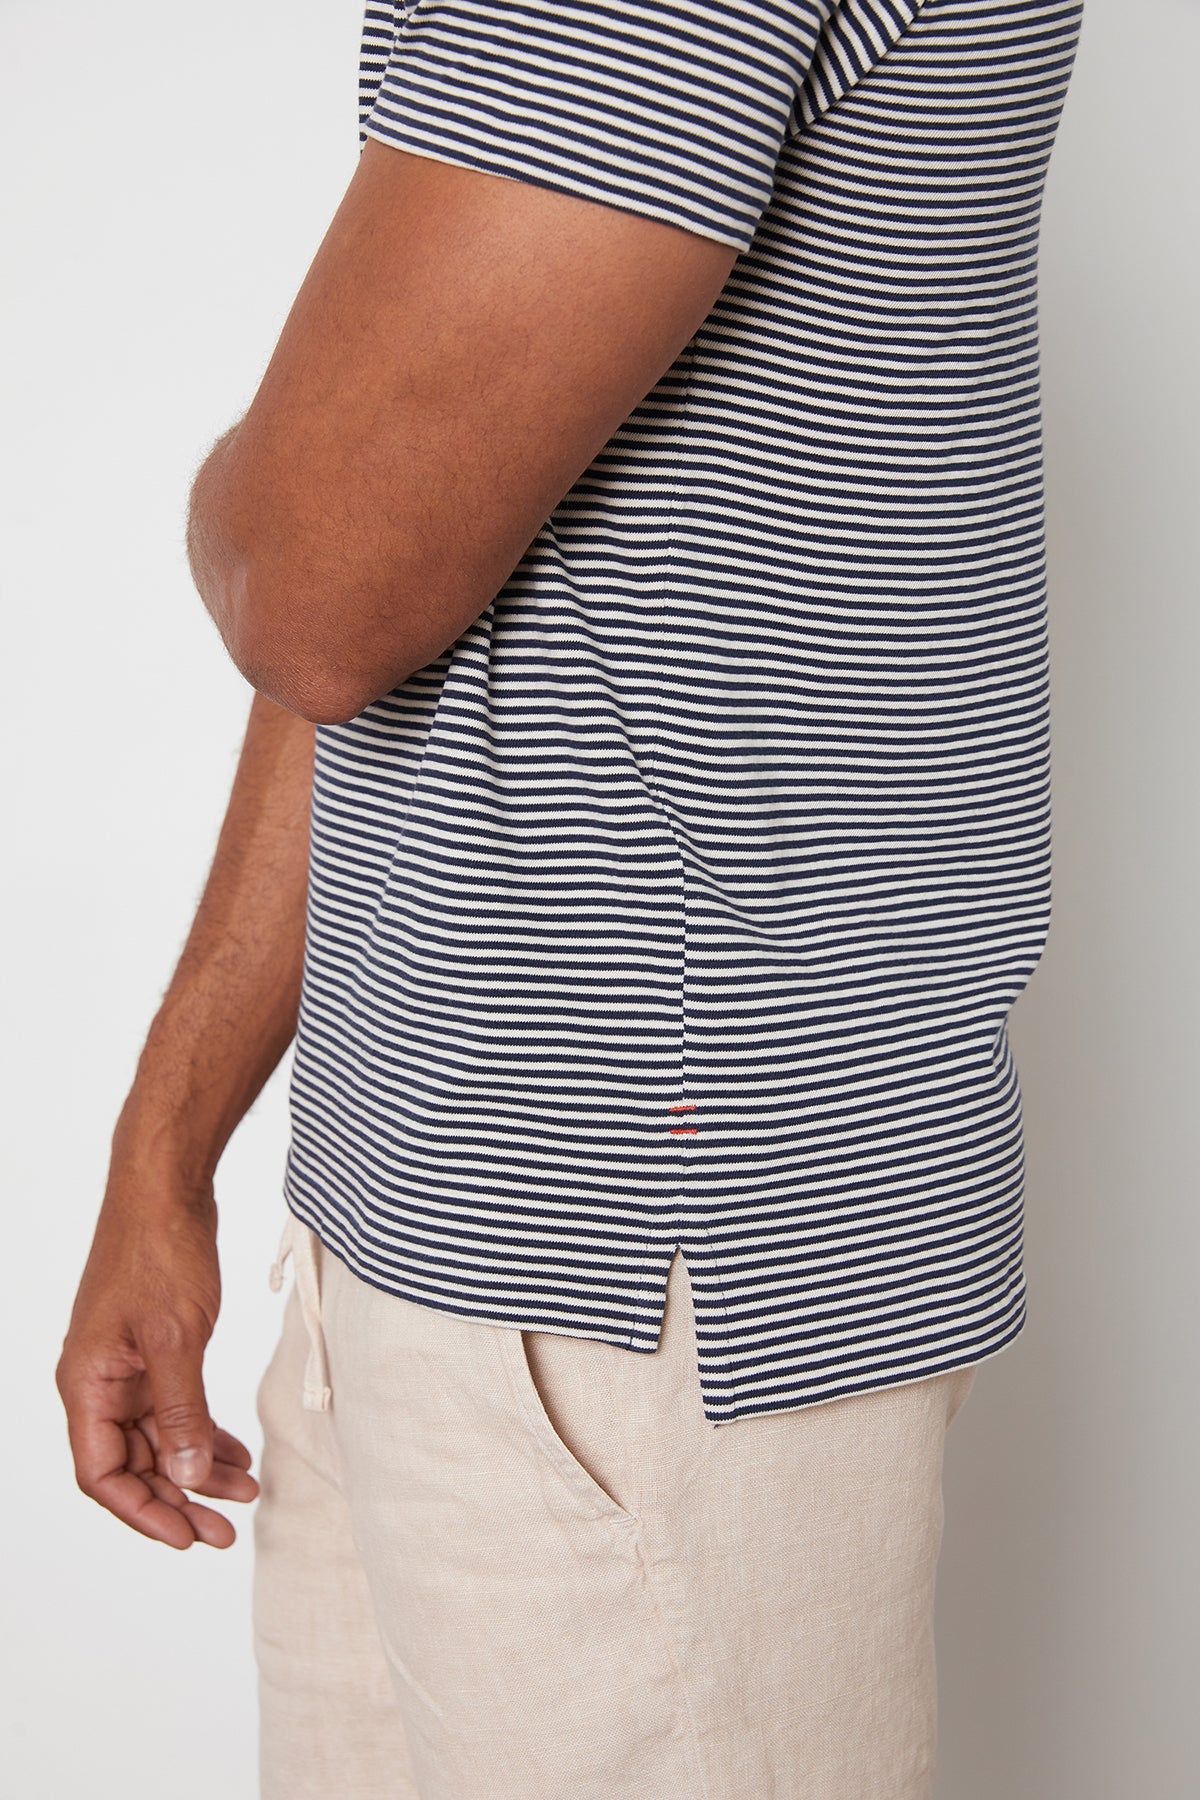 William Striped Polo with Navy Stripes and Jonathan Shorts in Tea Side-24705848705217